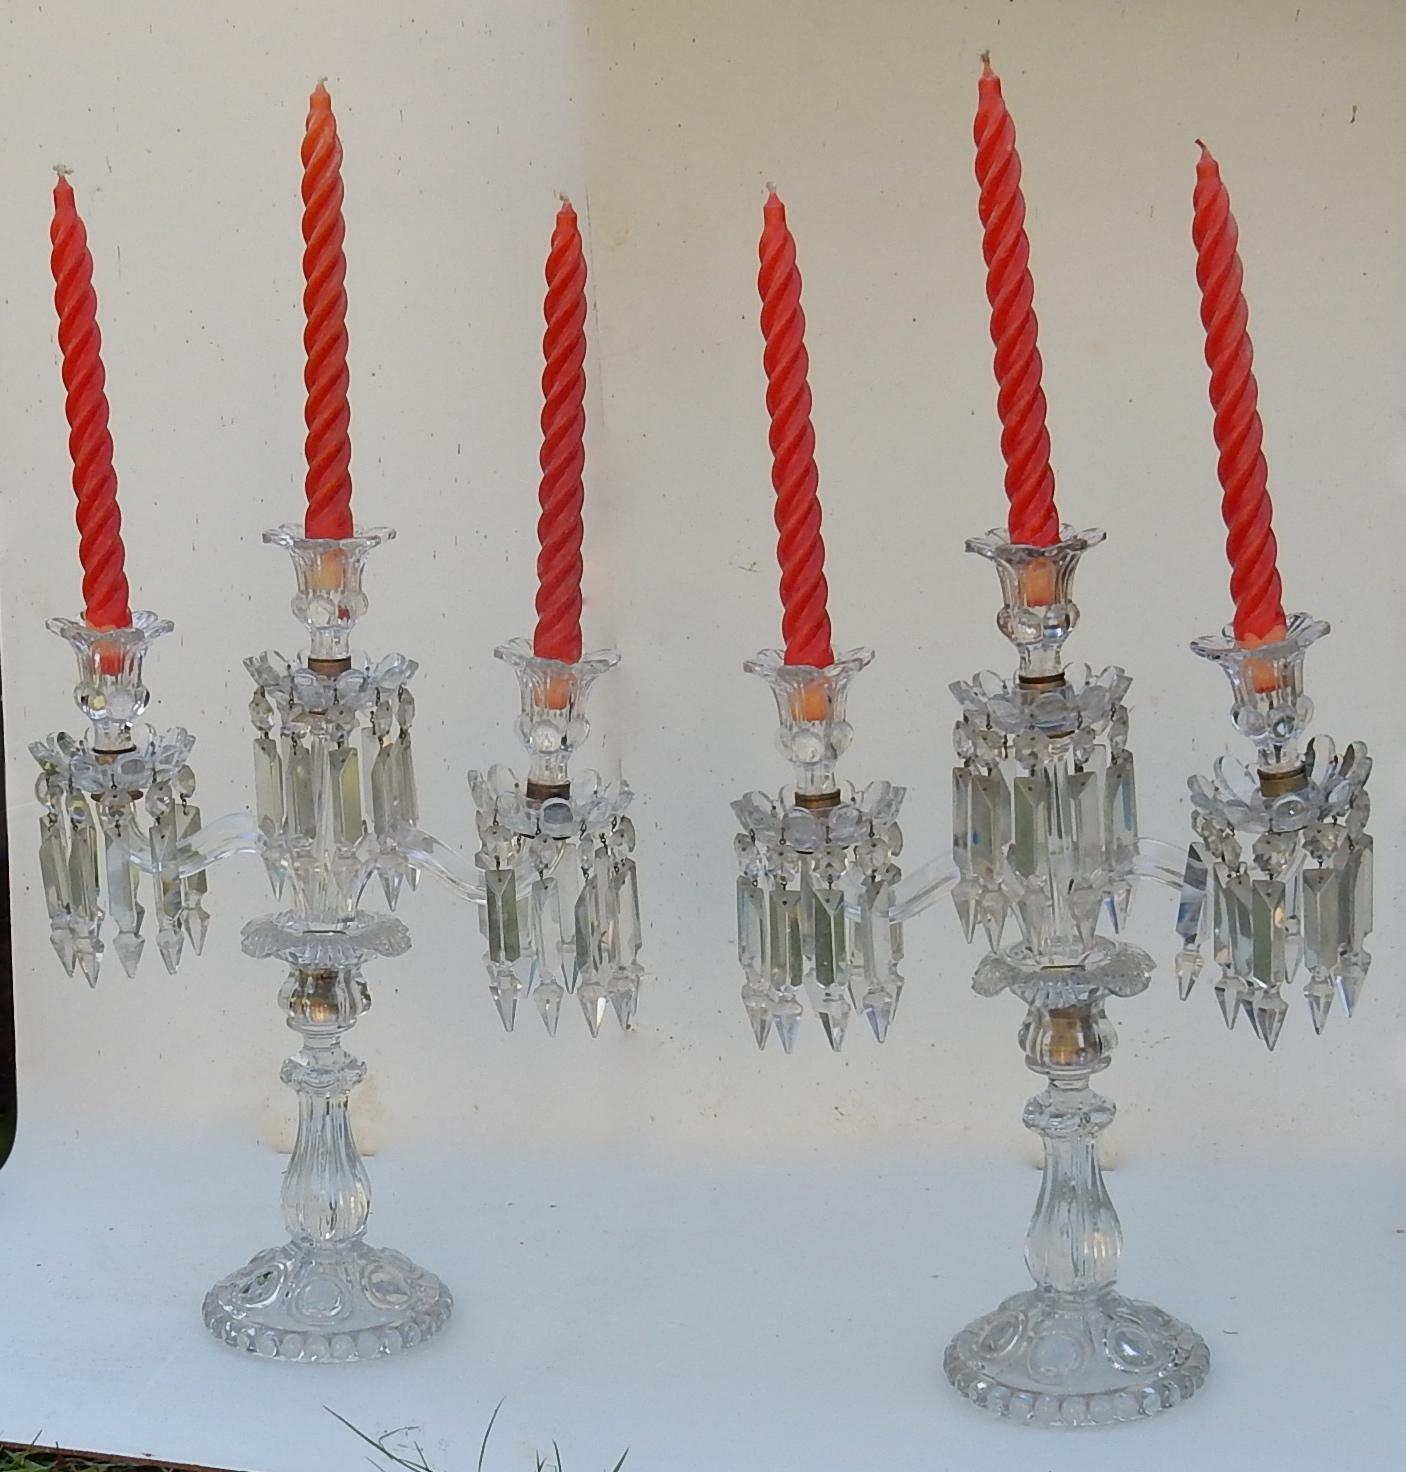 Carved 1950 Pair of Baccarat Crystal Chandeliers with 2 Arms and Signed Baccarat